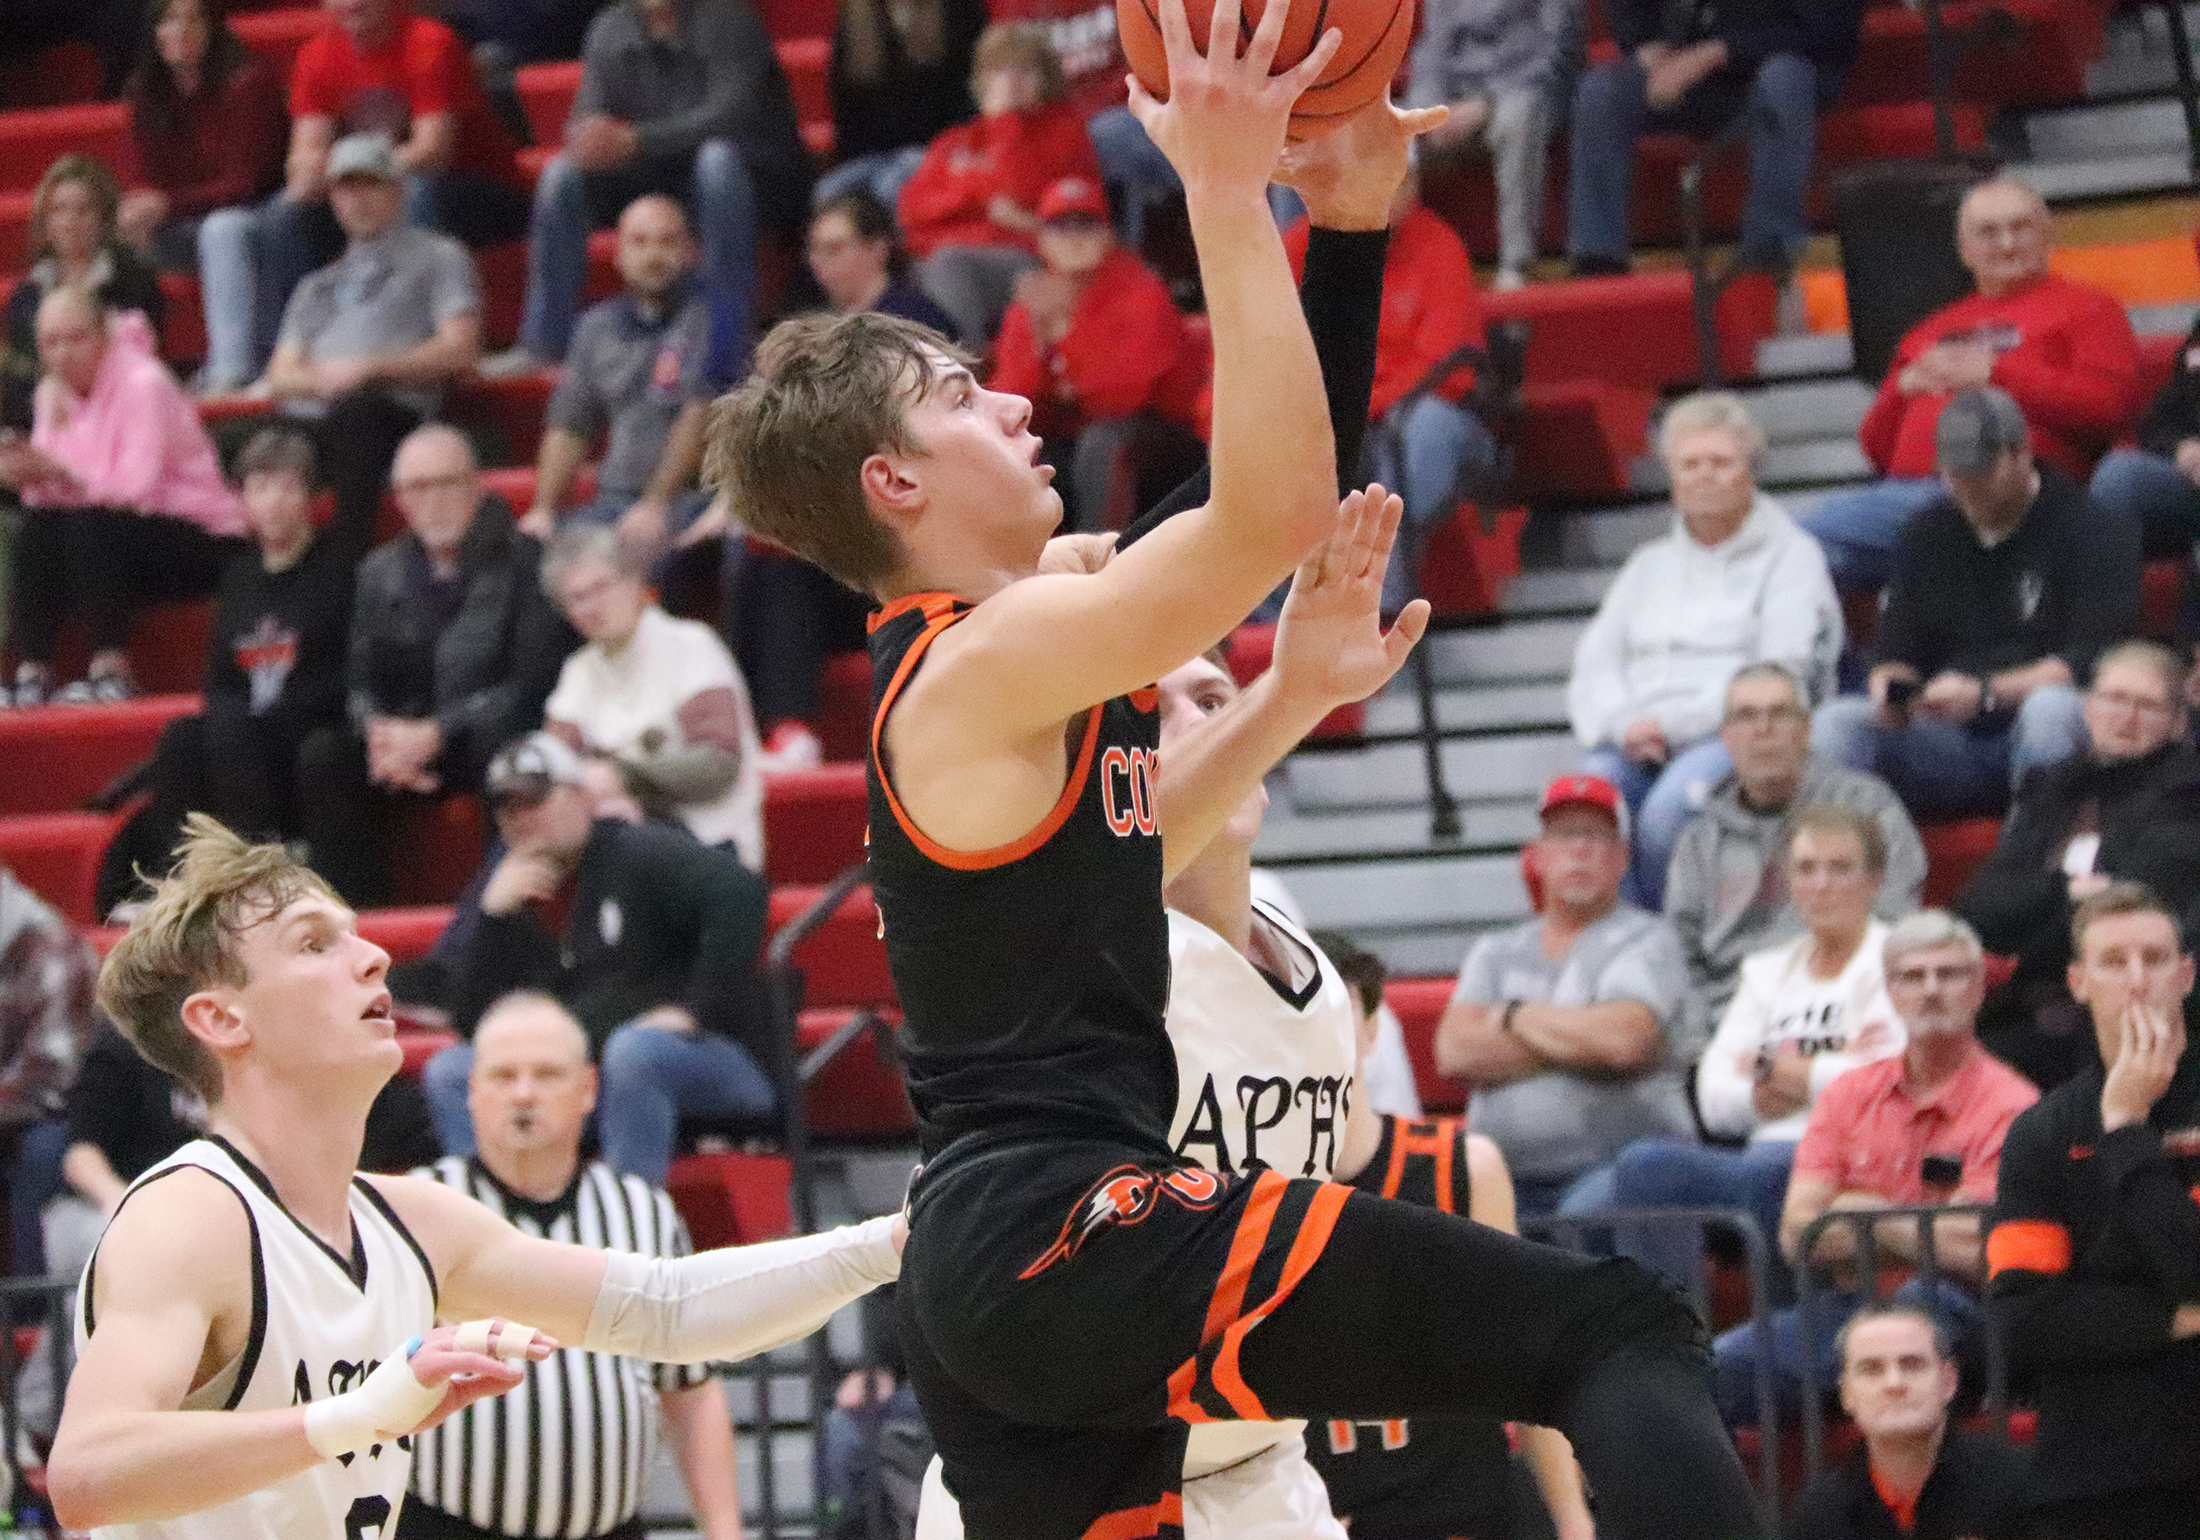 Comets to host Center Point-Urbana in Substate opener next Monday